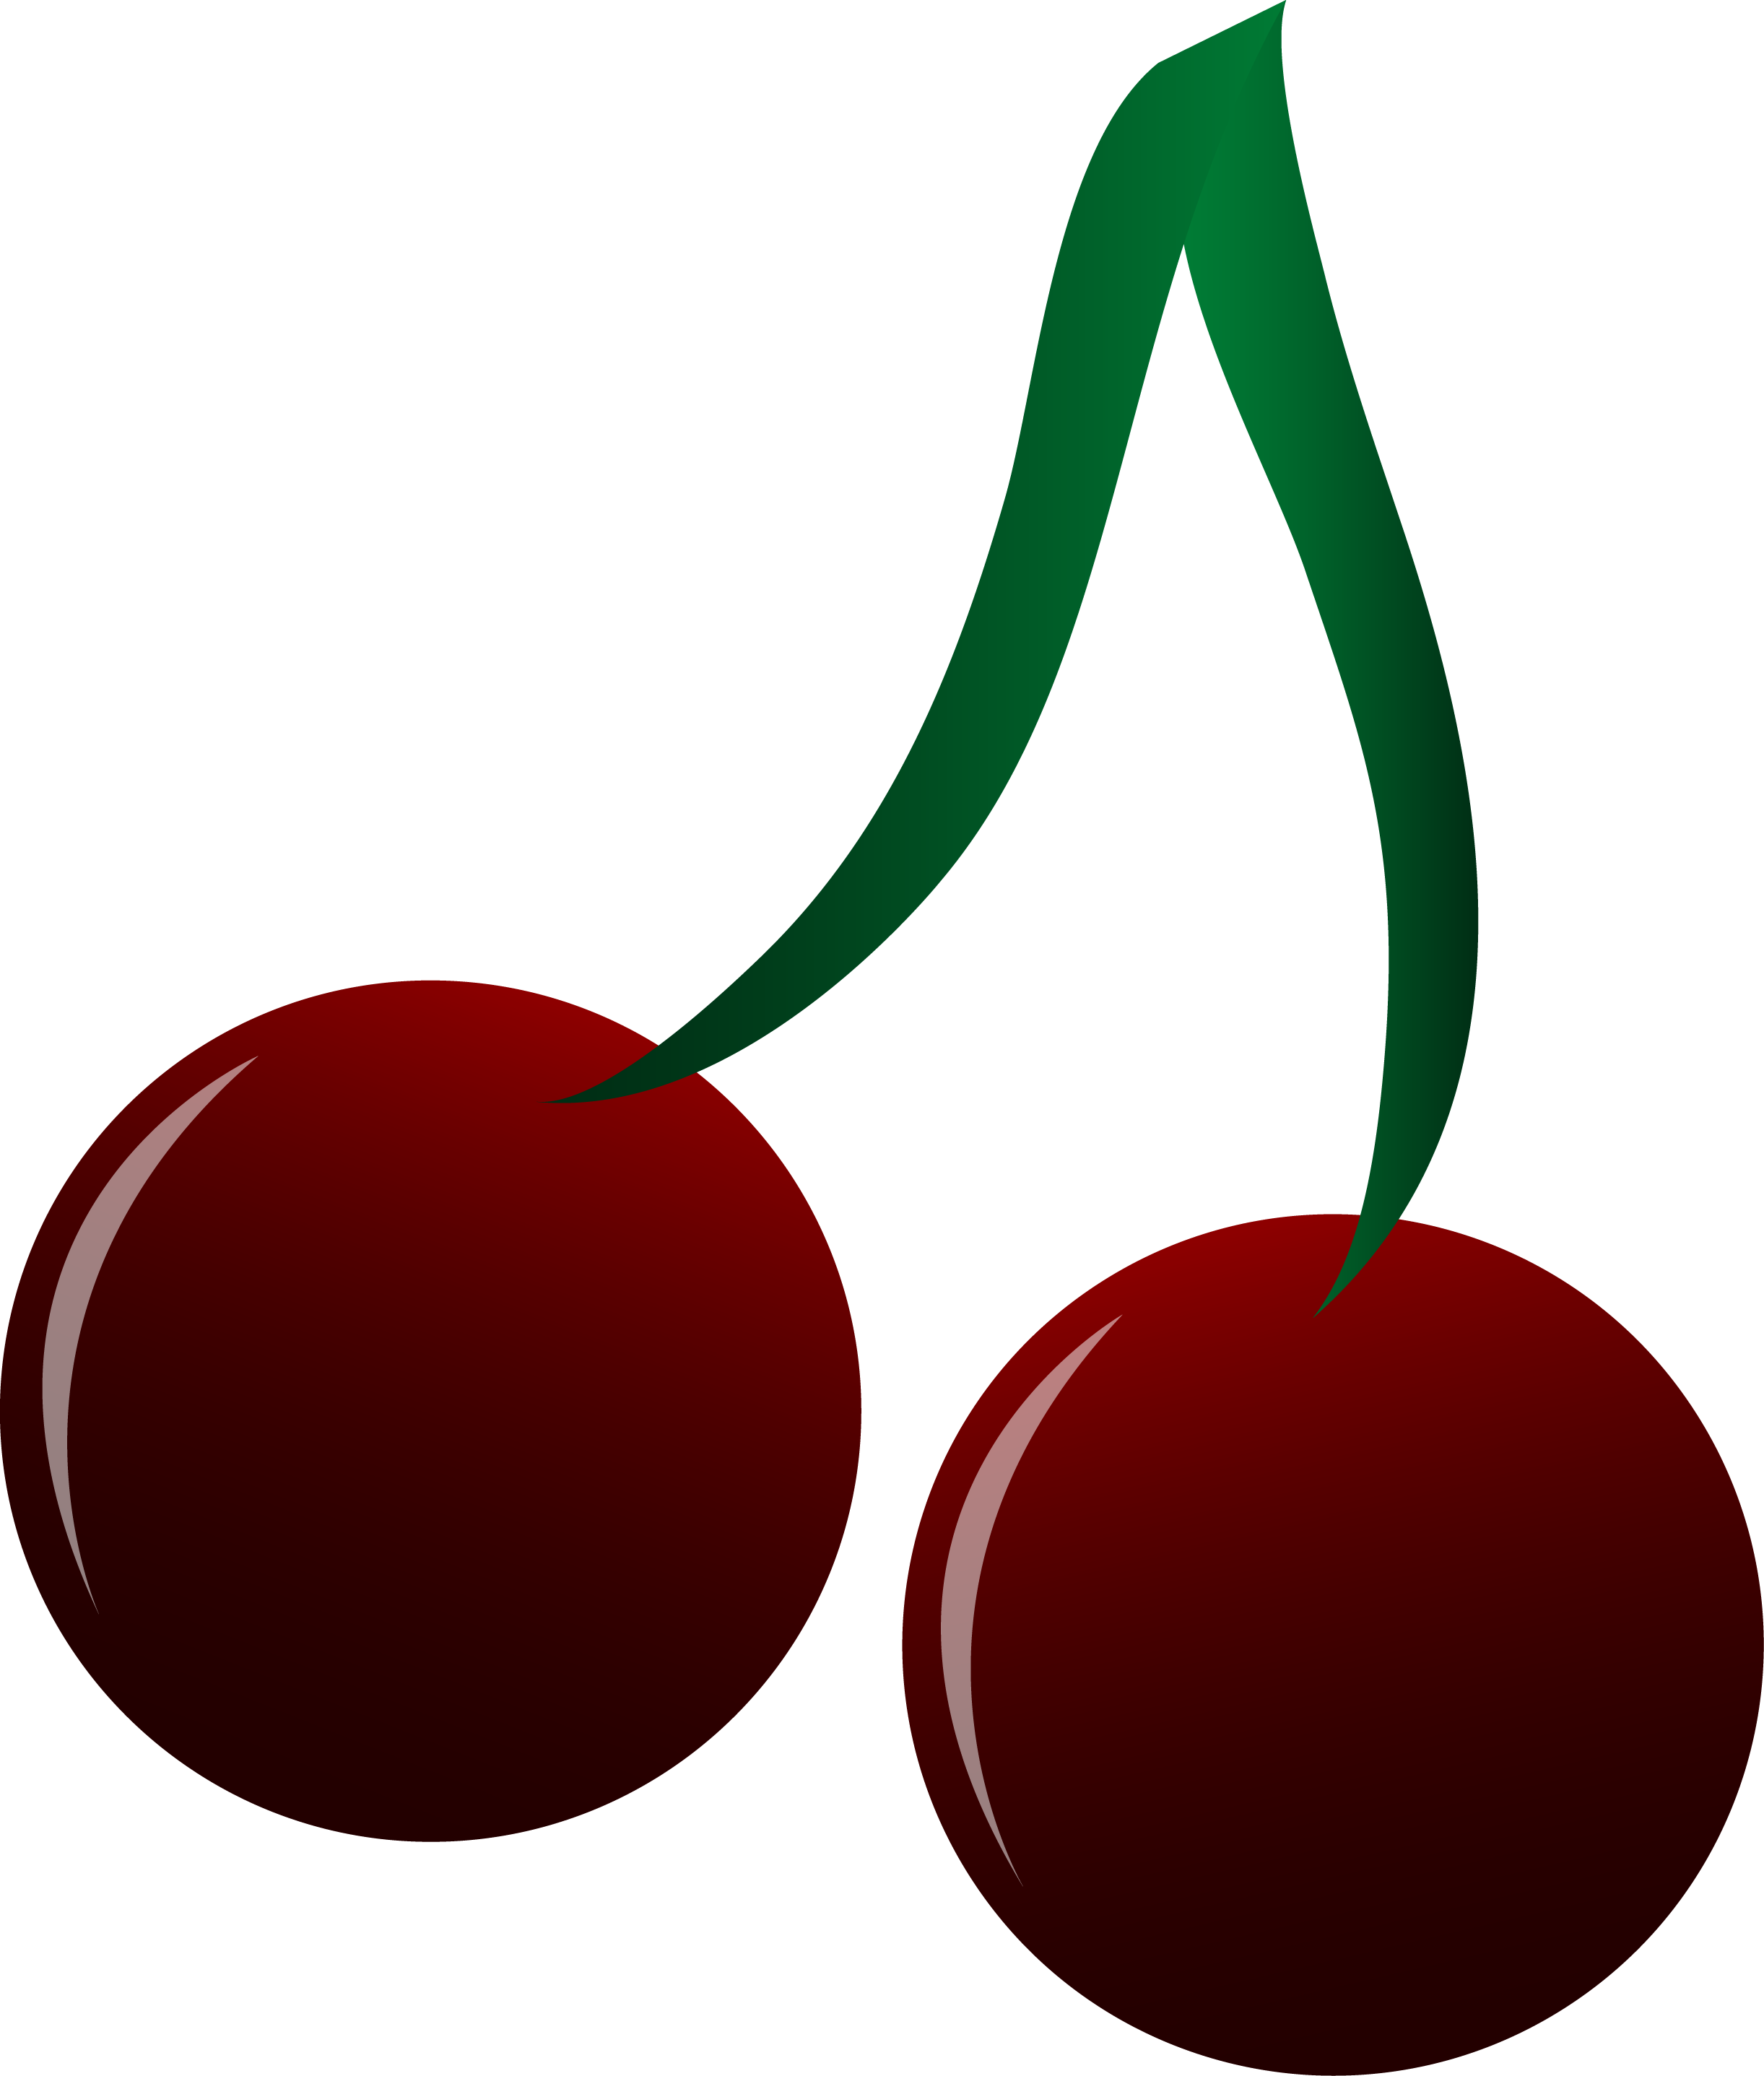 Cherries clipart two.